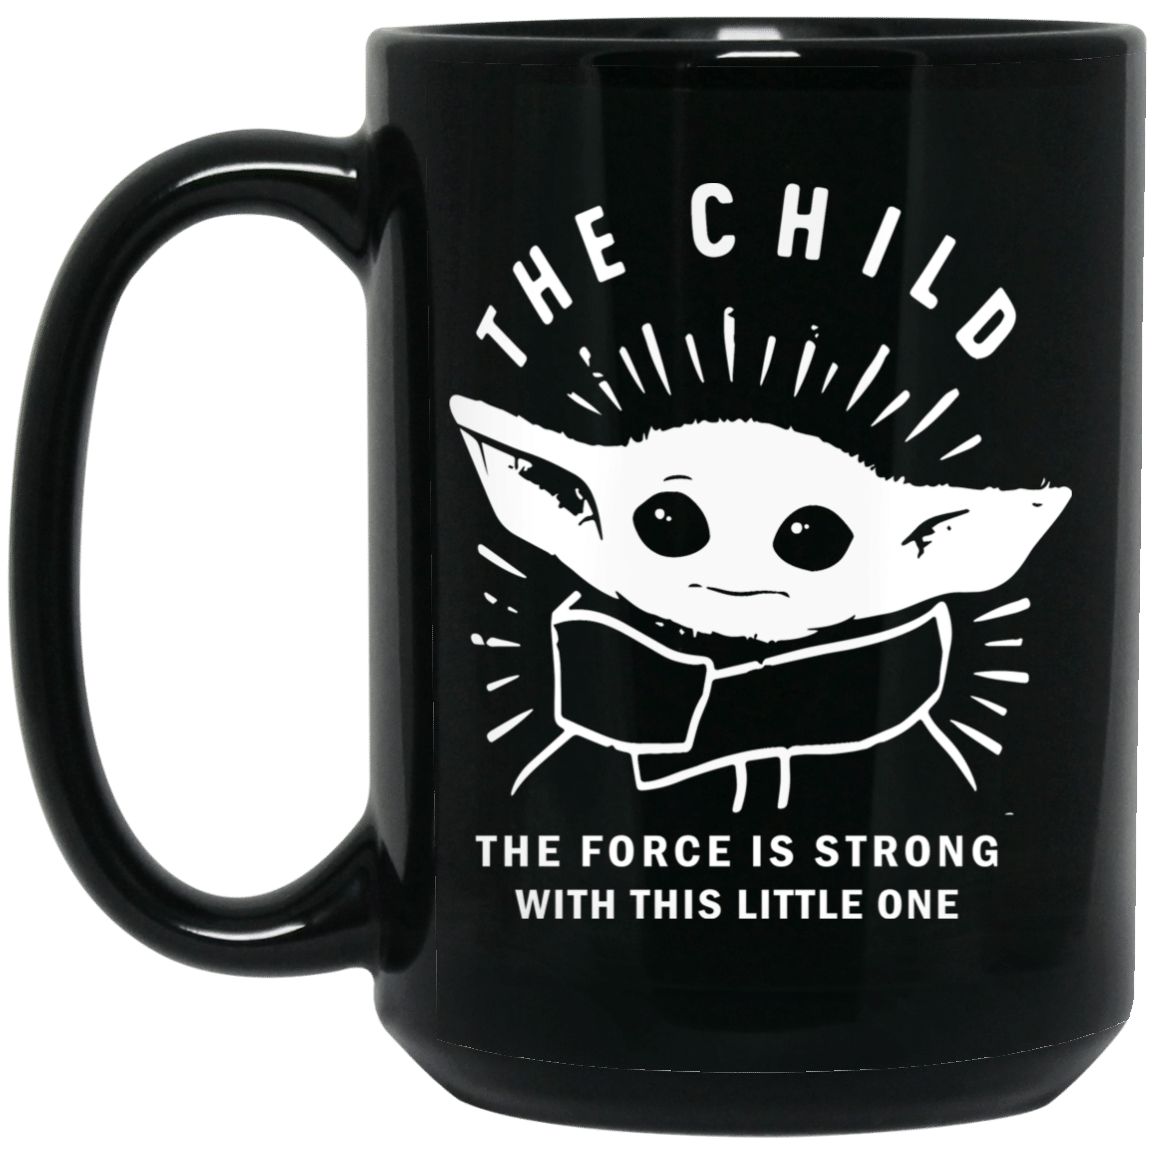 https://teepital.com/wp-content/uploads/2022/04/baby-yoda-the-child-the-force-is-strong-with-this-little-one-premium-sublime-ceramic-coffee-mug-blacktly33.jpg